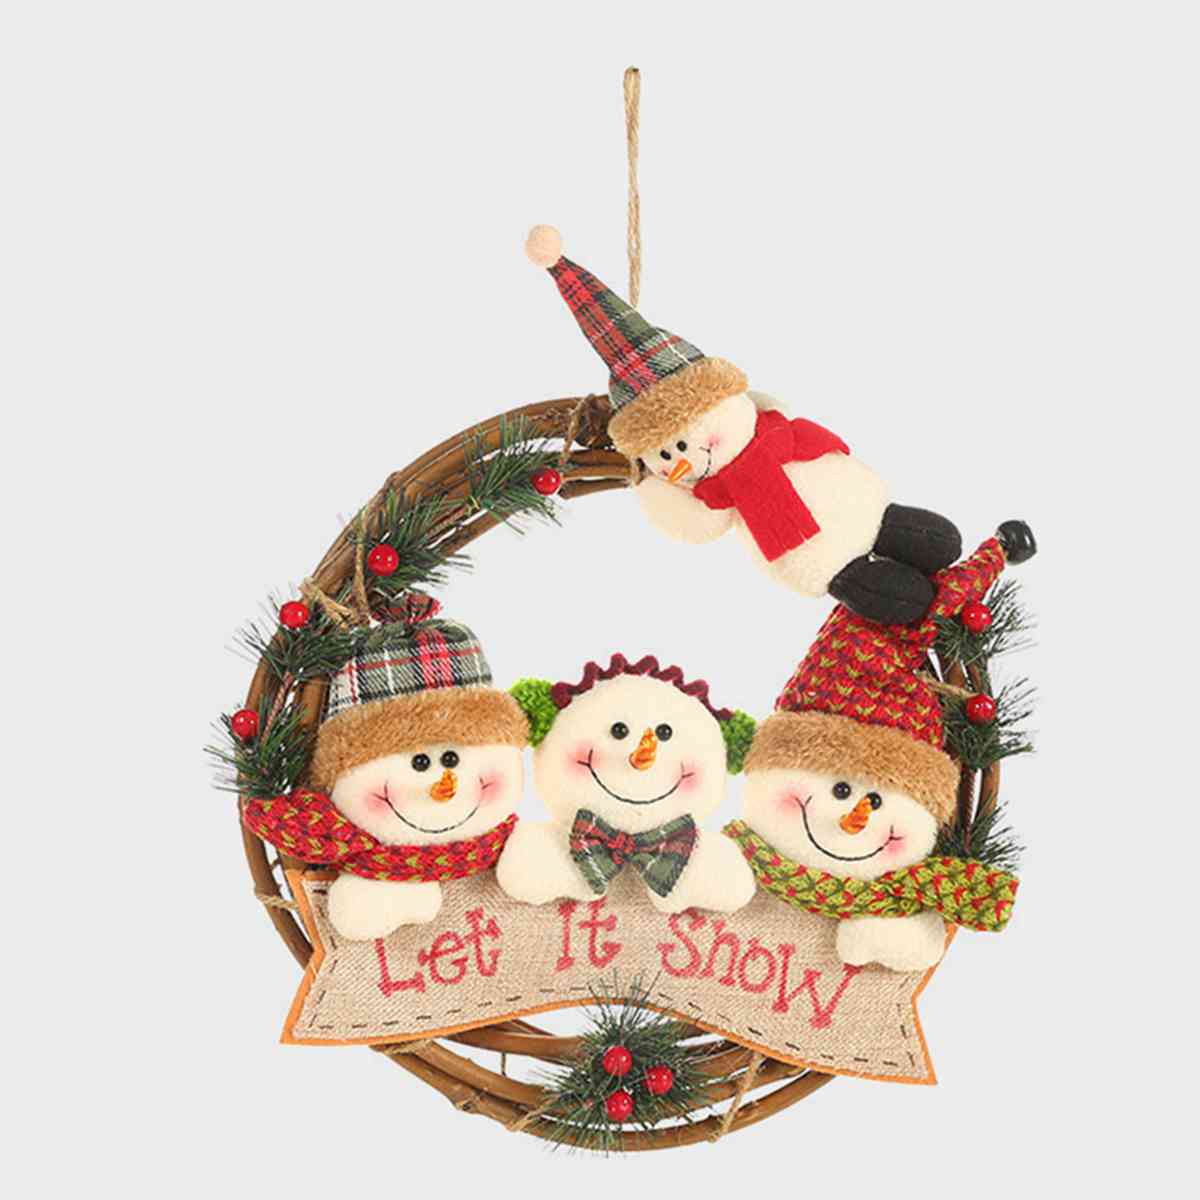 Christmas Wreath Merry Christmas or Let it Snow Ornament 11.4"H x 11.4"W